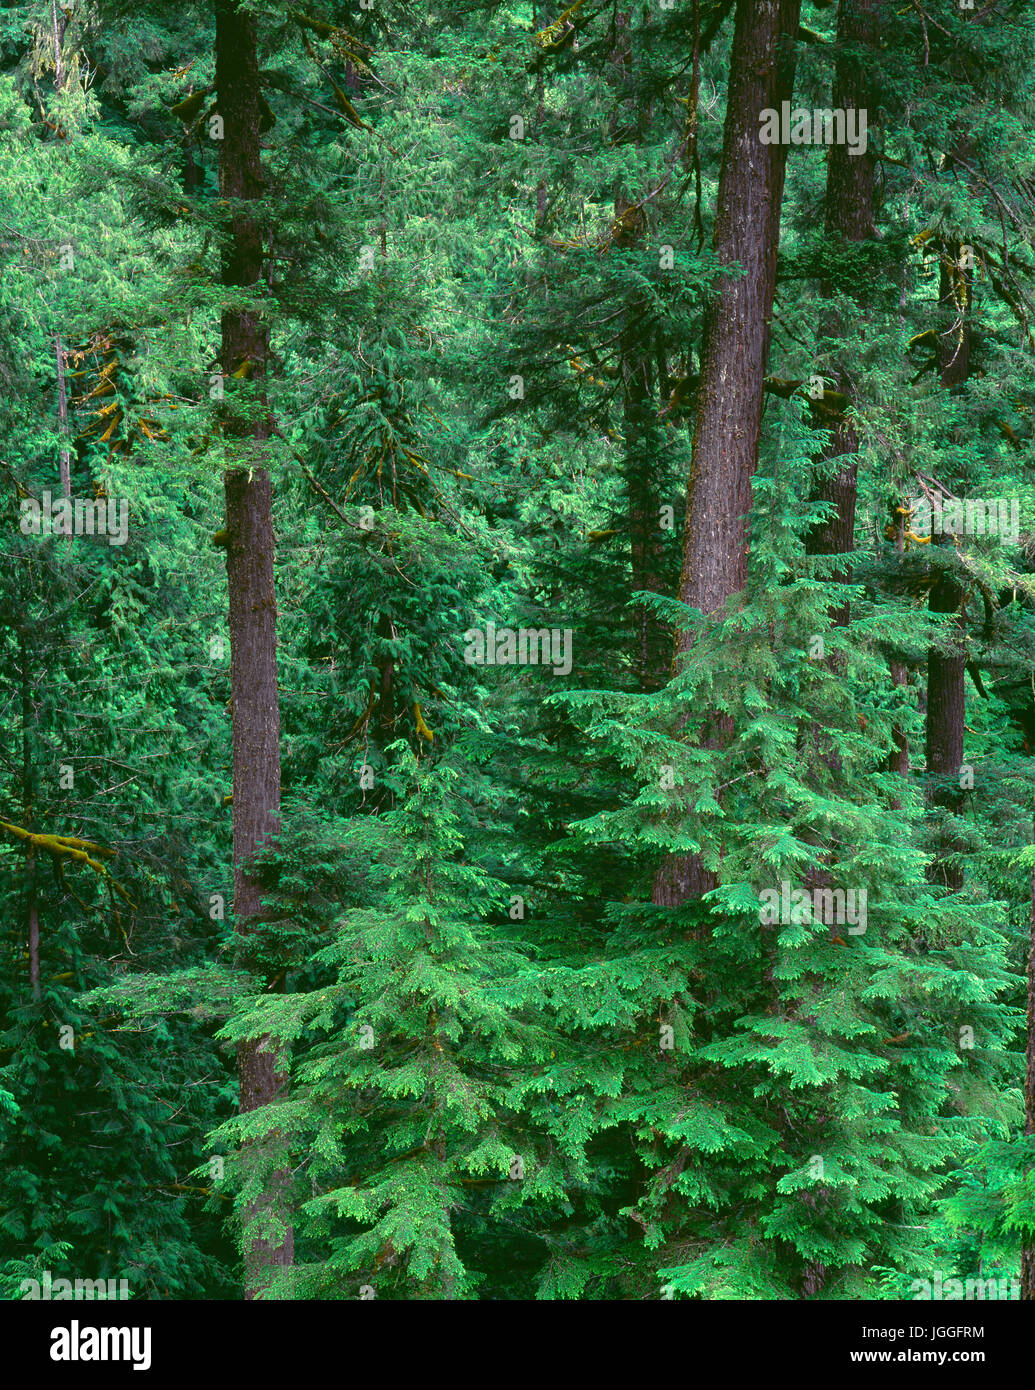 USA, Oregon, Willamette National Forest, Middle Santiam Wilderness, Old-growth forest with large Douglas fir and western hemlock trees. Stock Photo